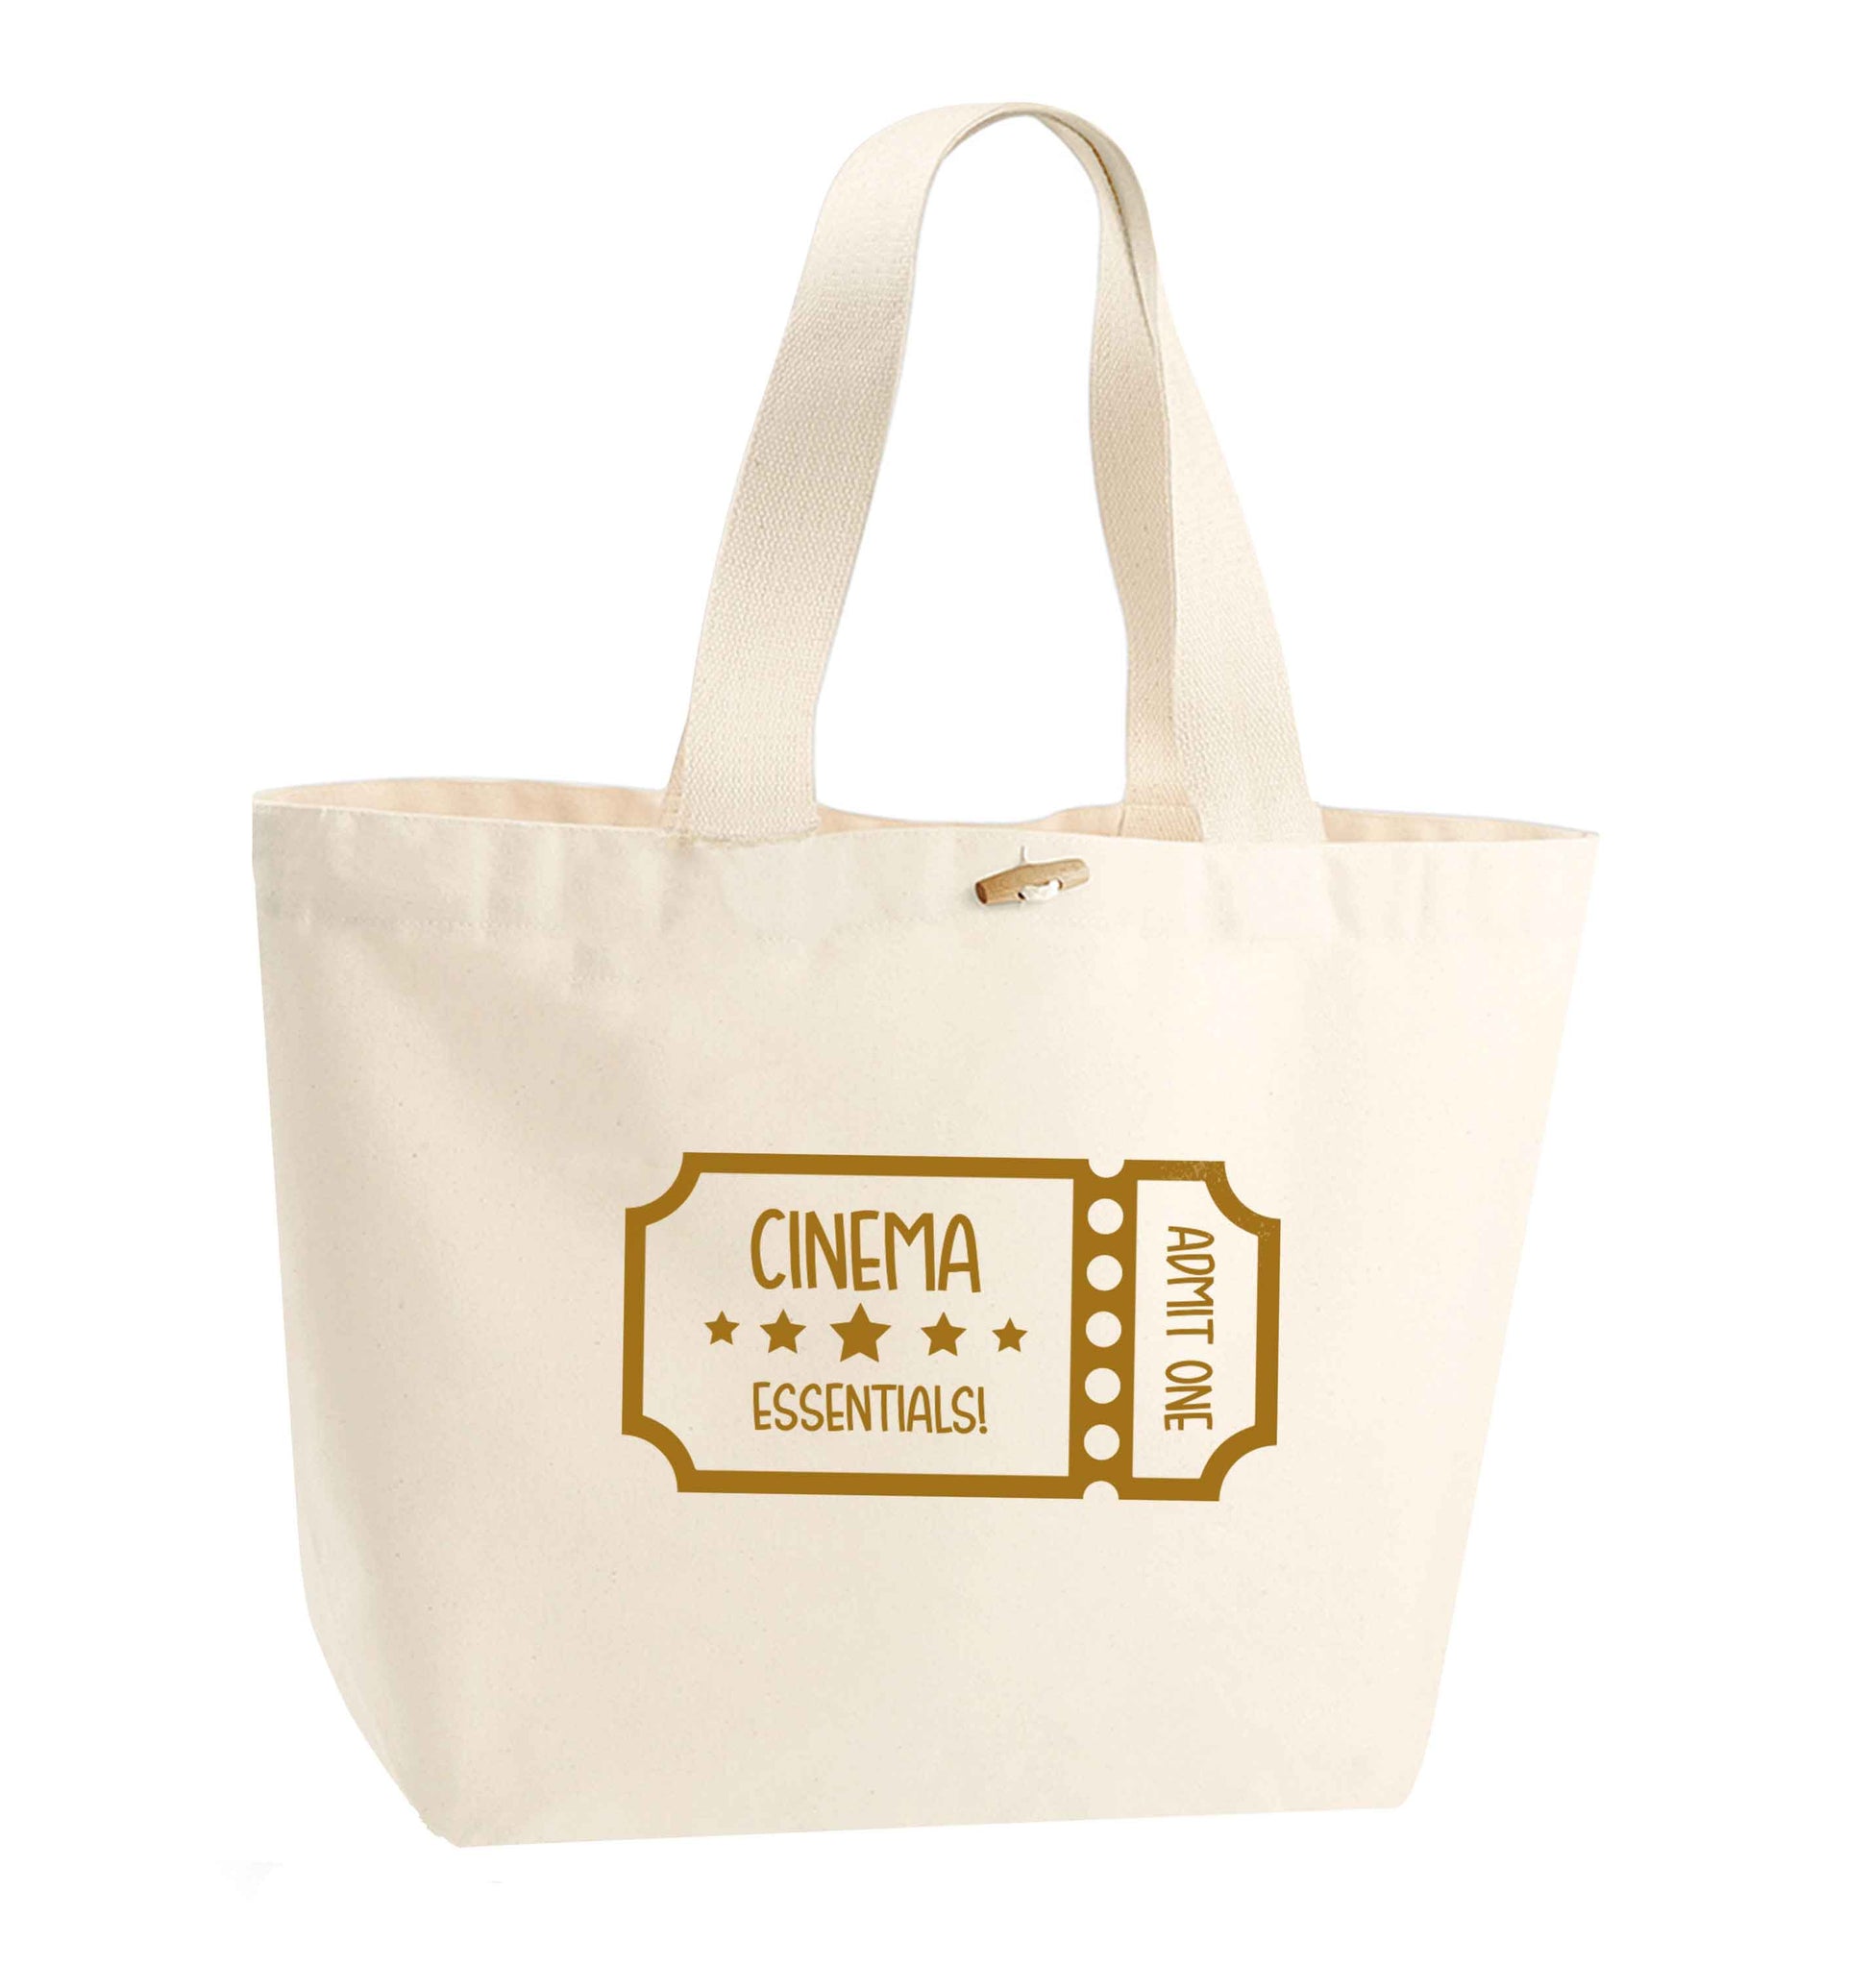 Cinema essentials organic cotton premium tote bag with wooden toggle in natural